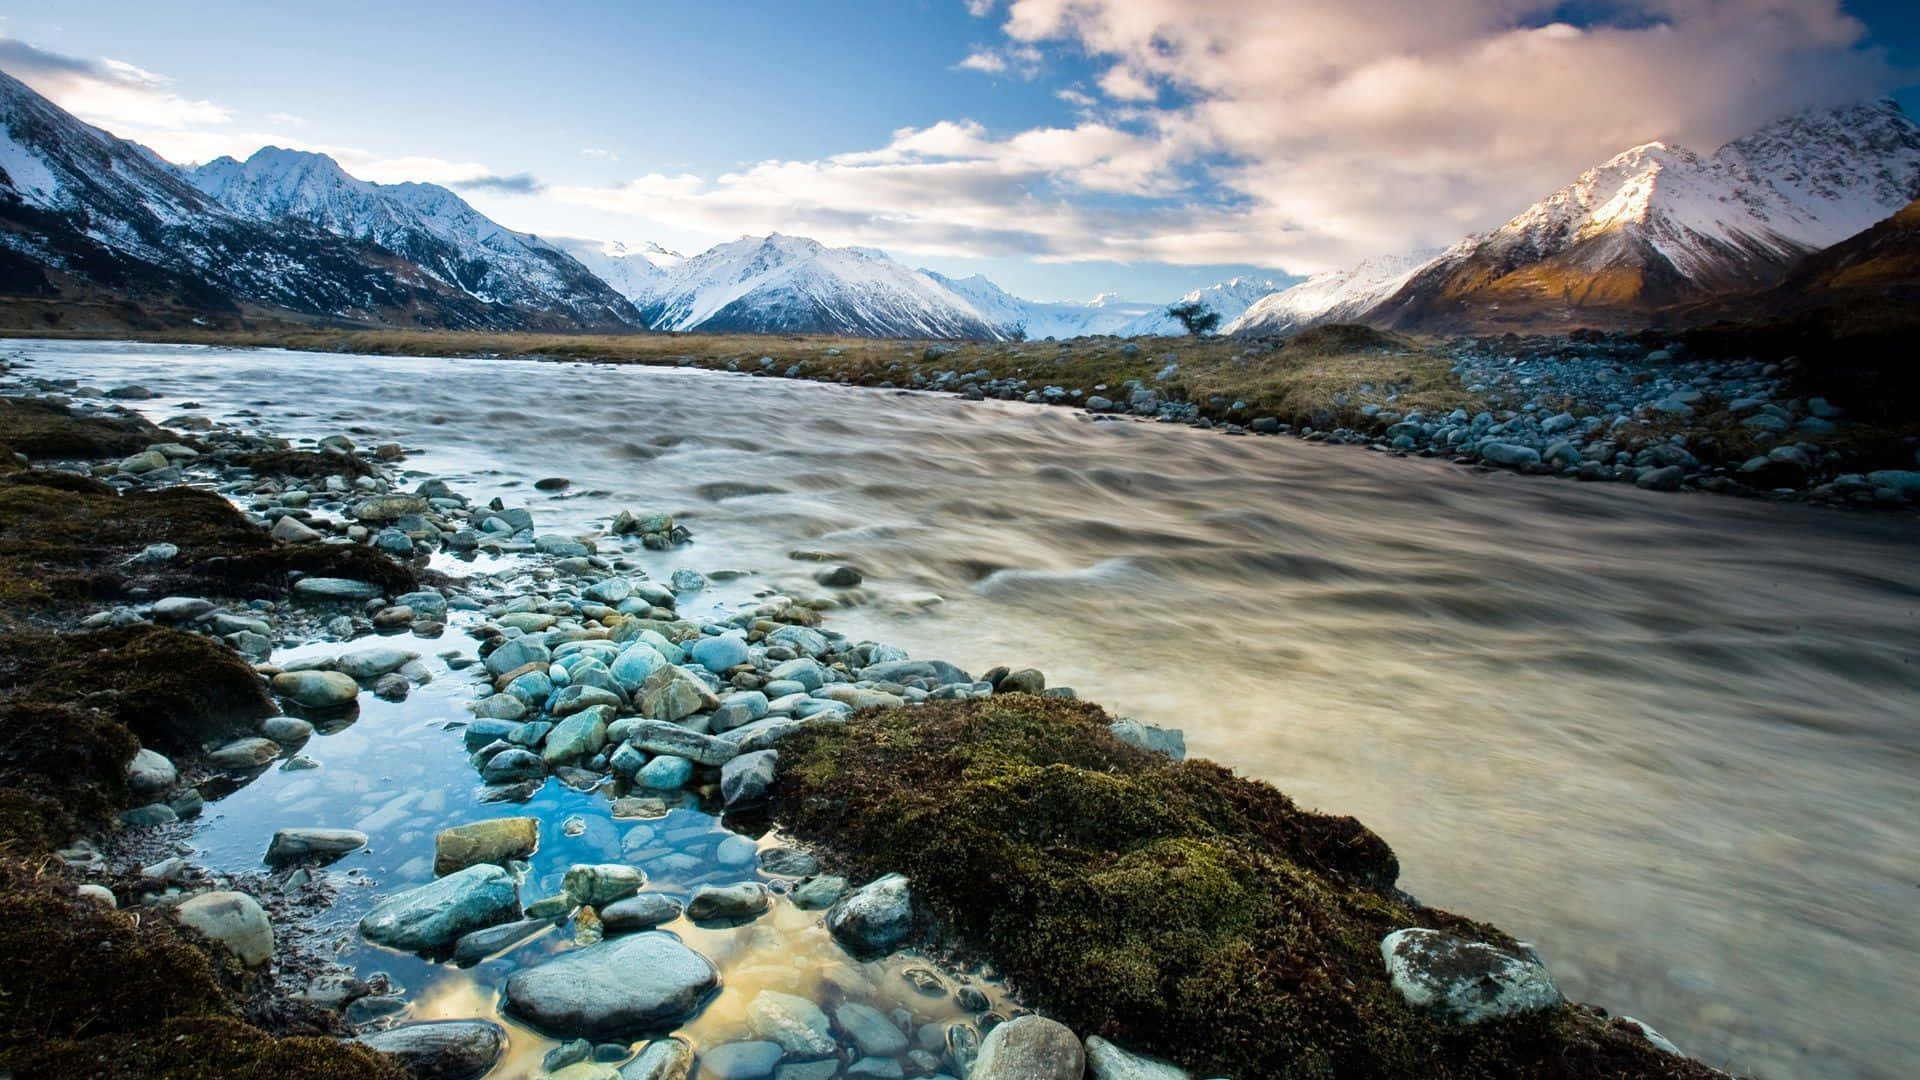 Magnificent Views of New Zealand's Southern Alps